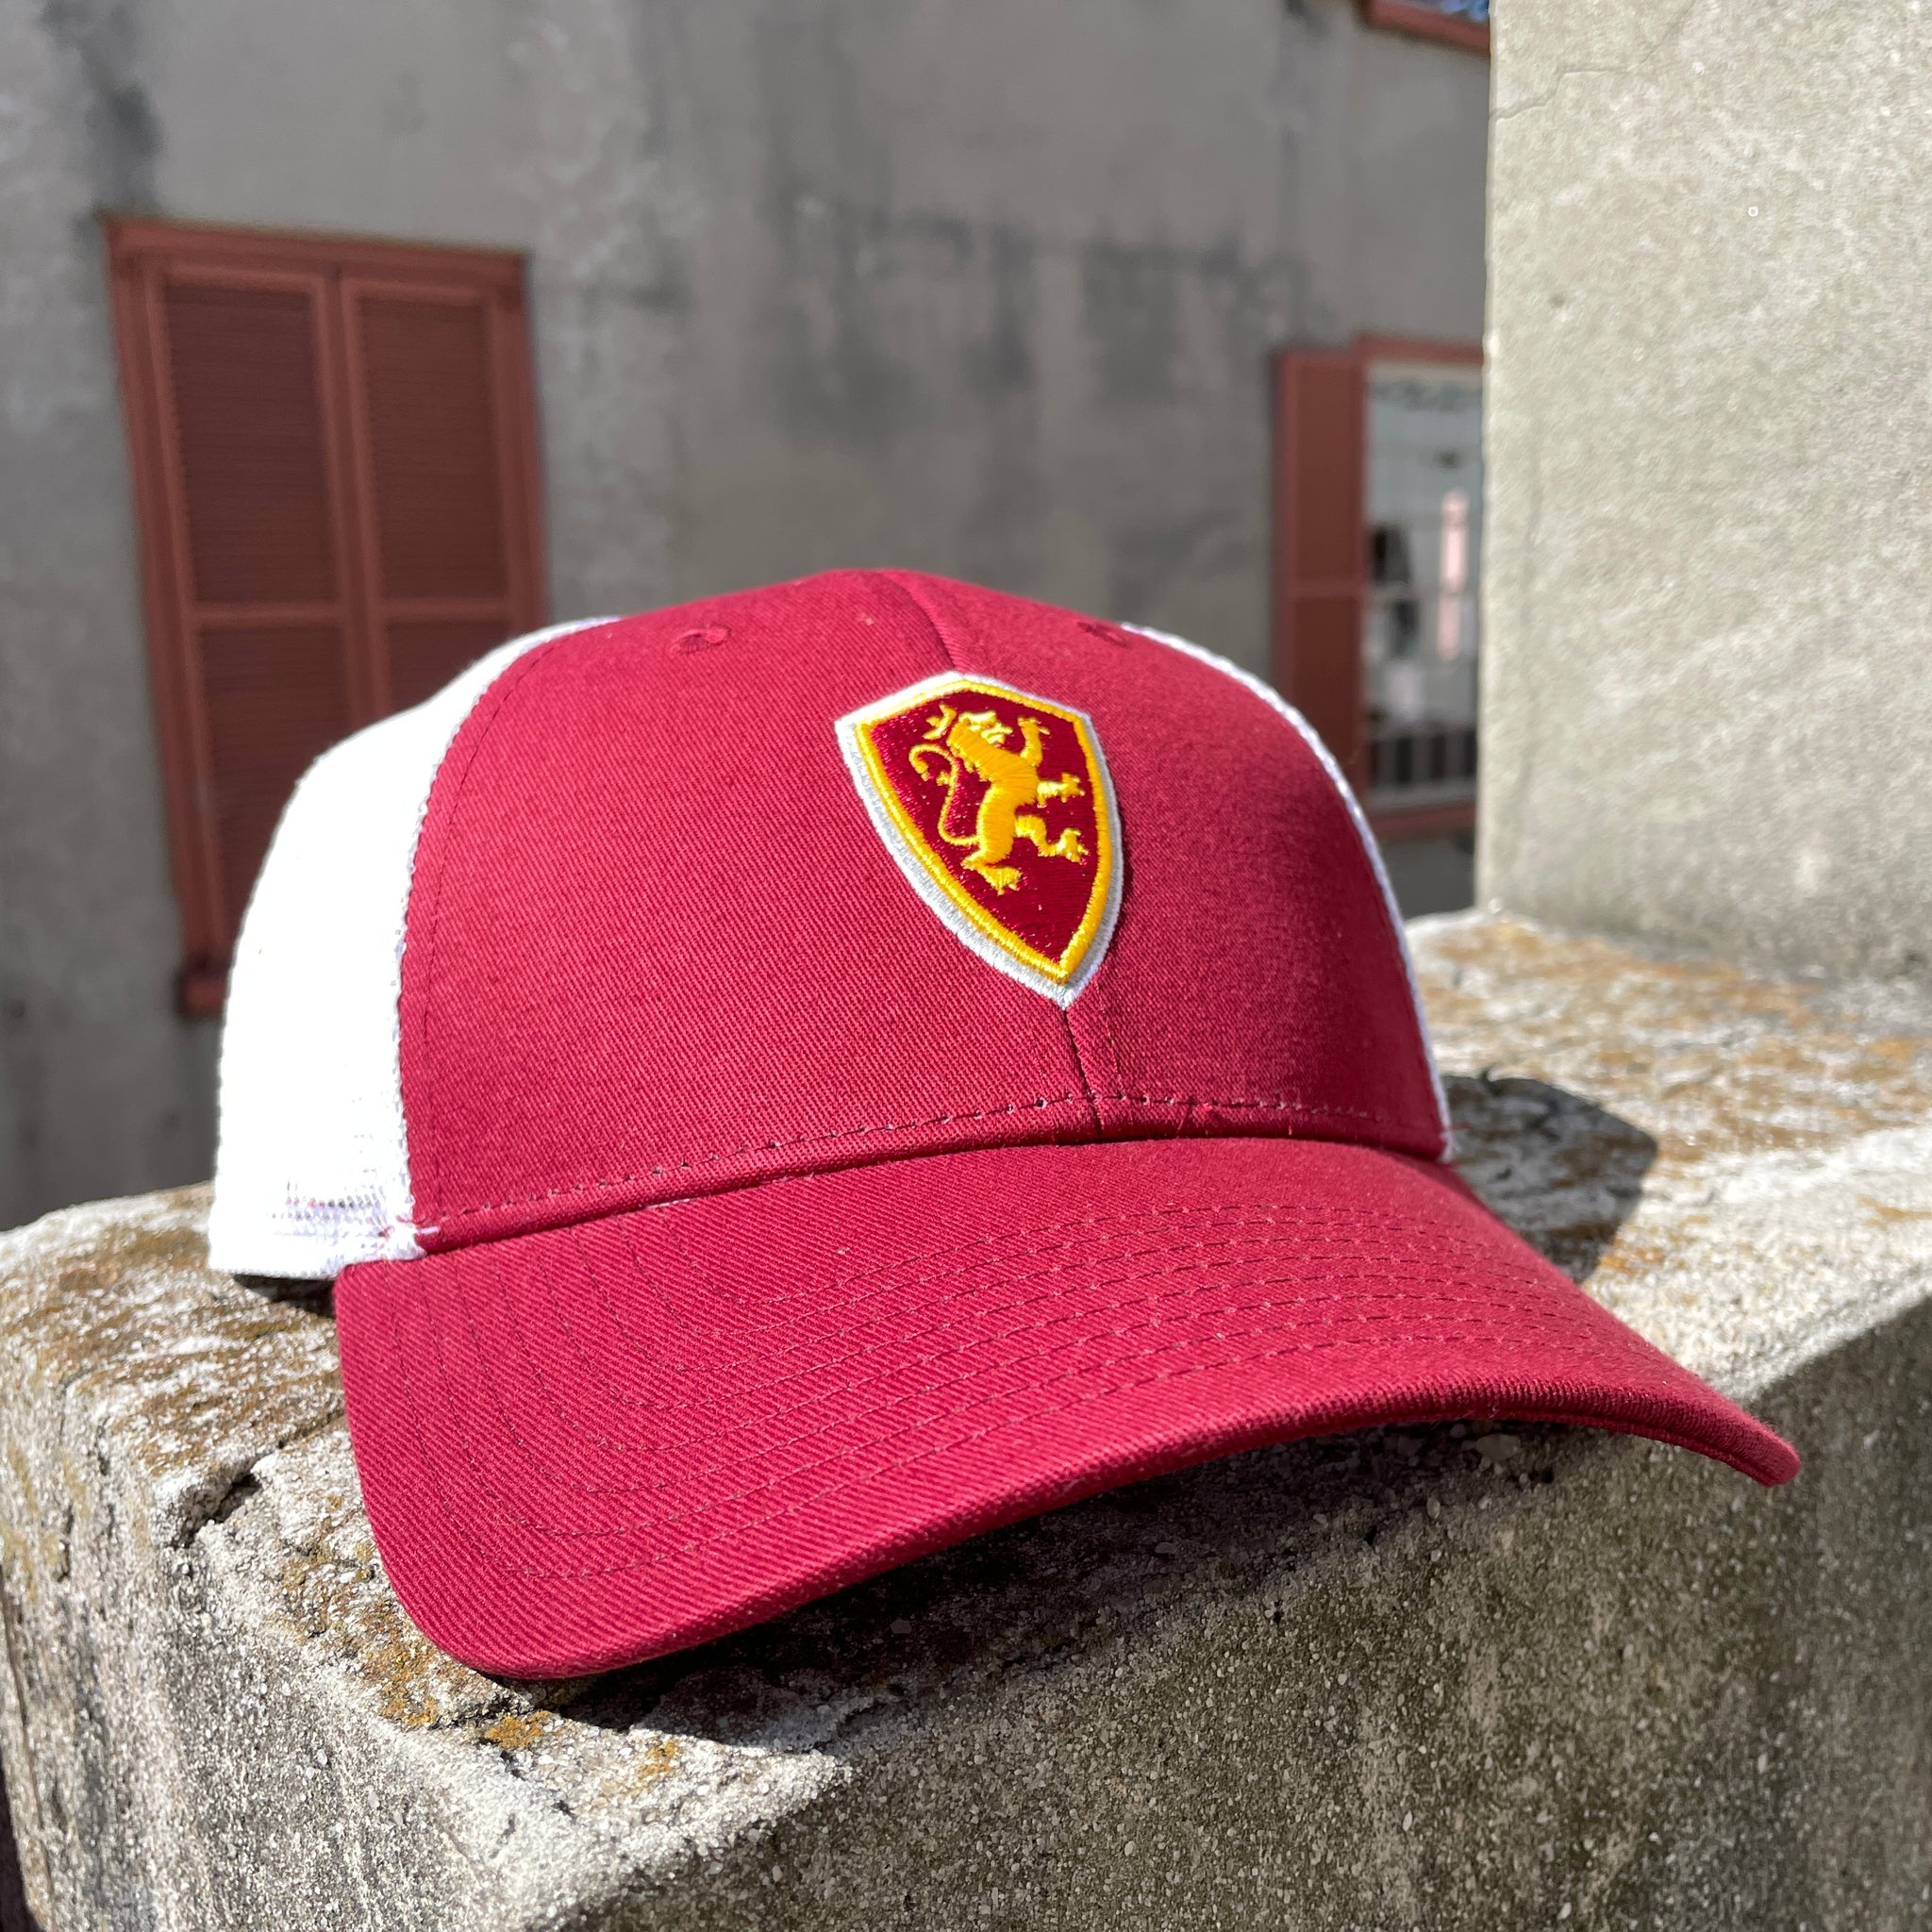 Crimson hat with white mesh and Flagler College Shield logo in center